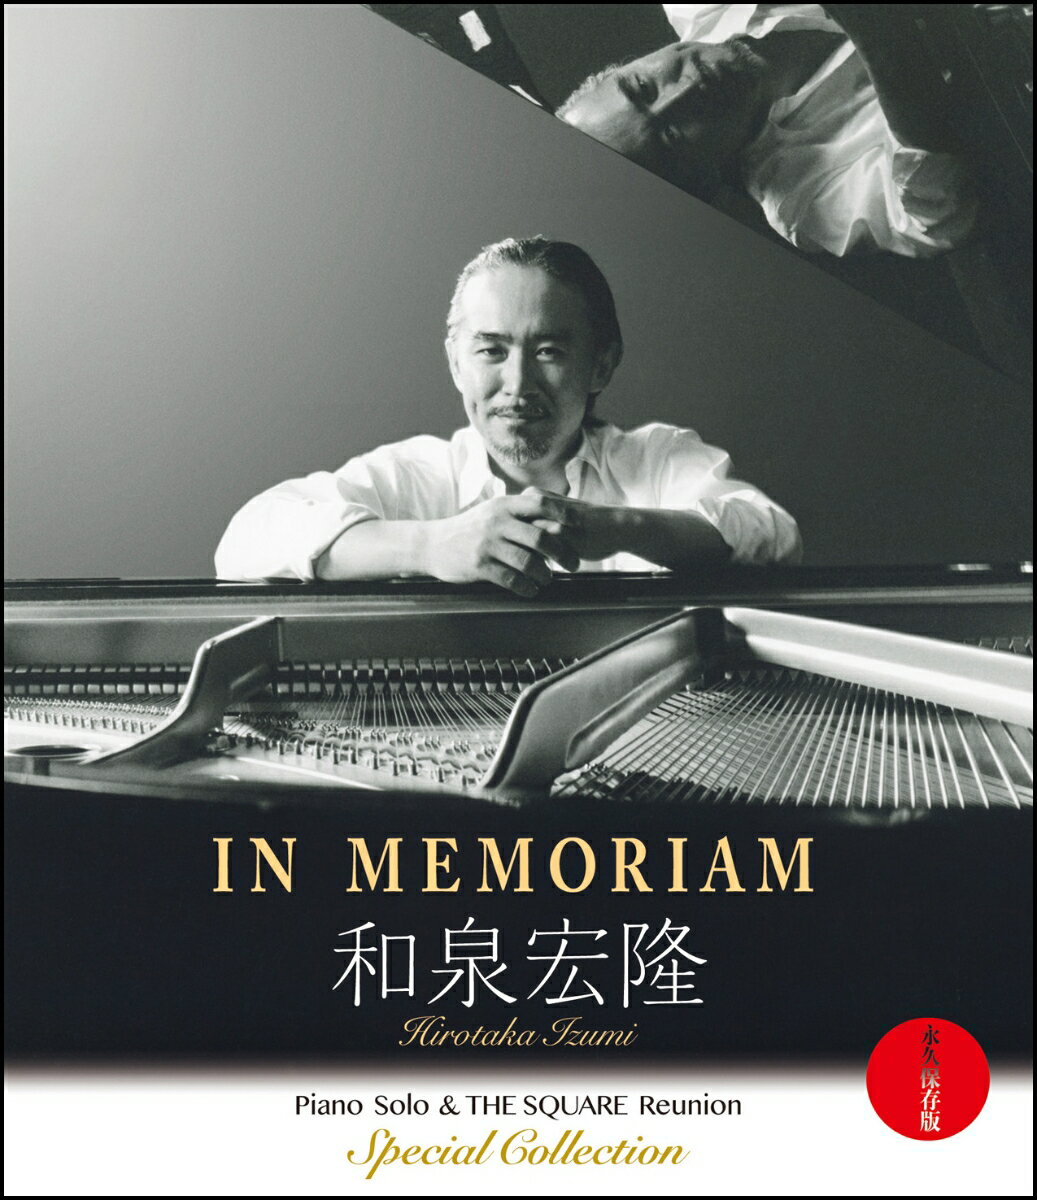 IN MEMORIAM aG / Piano Solo & THE SQUARE Reunion Special Collection -ivۑŁ[ [ aG/THE SQUARE Reunion ]